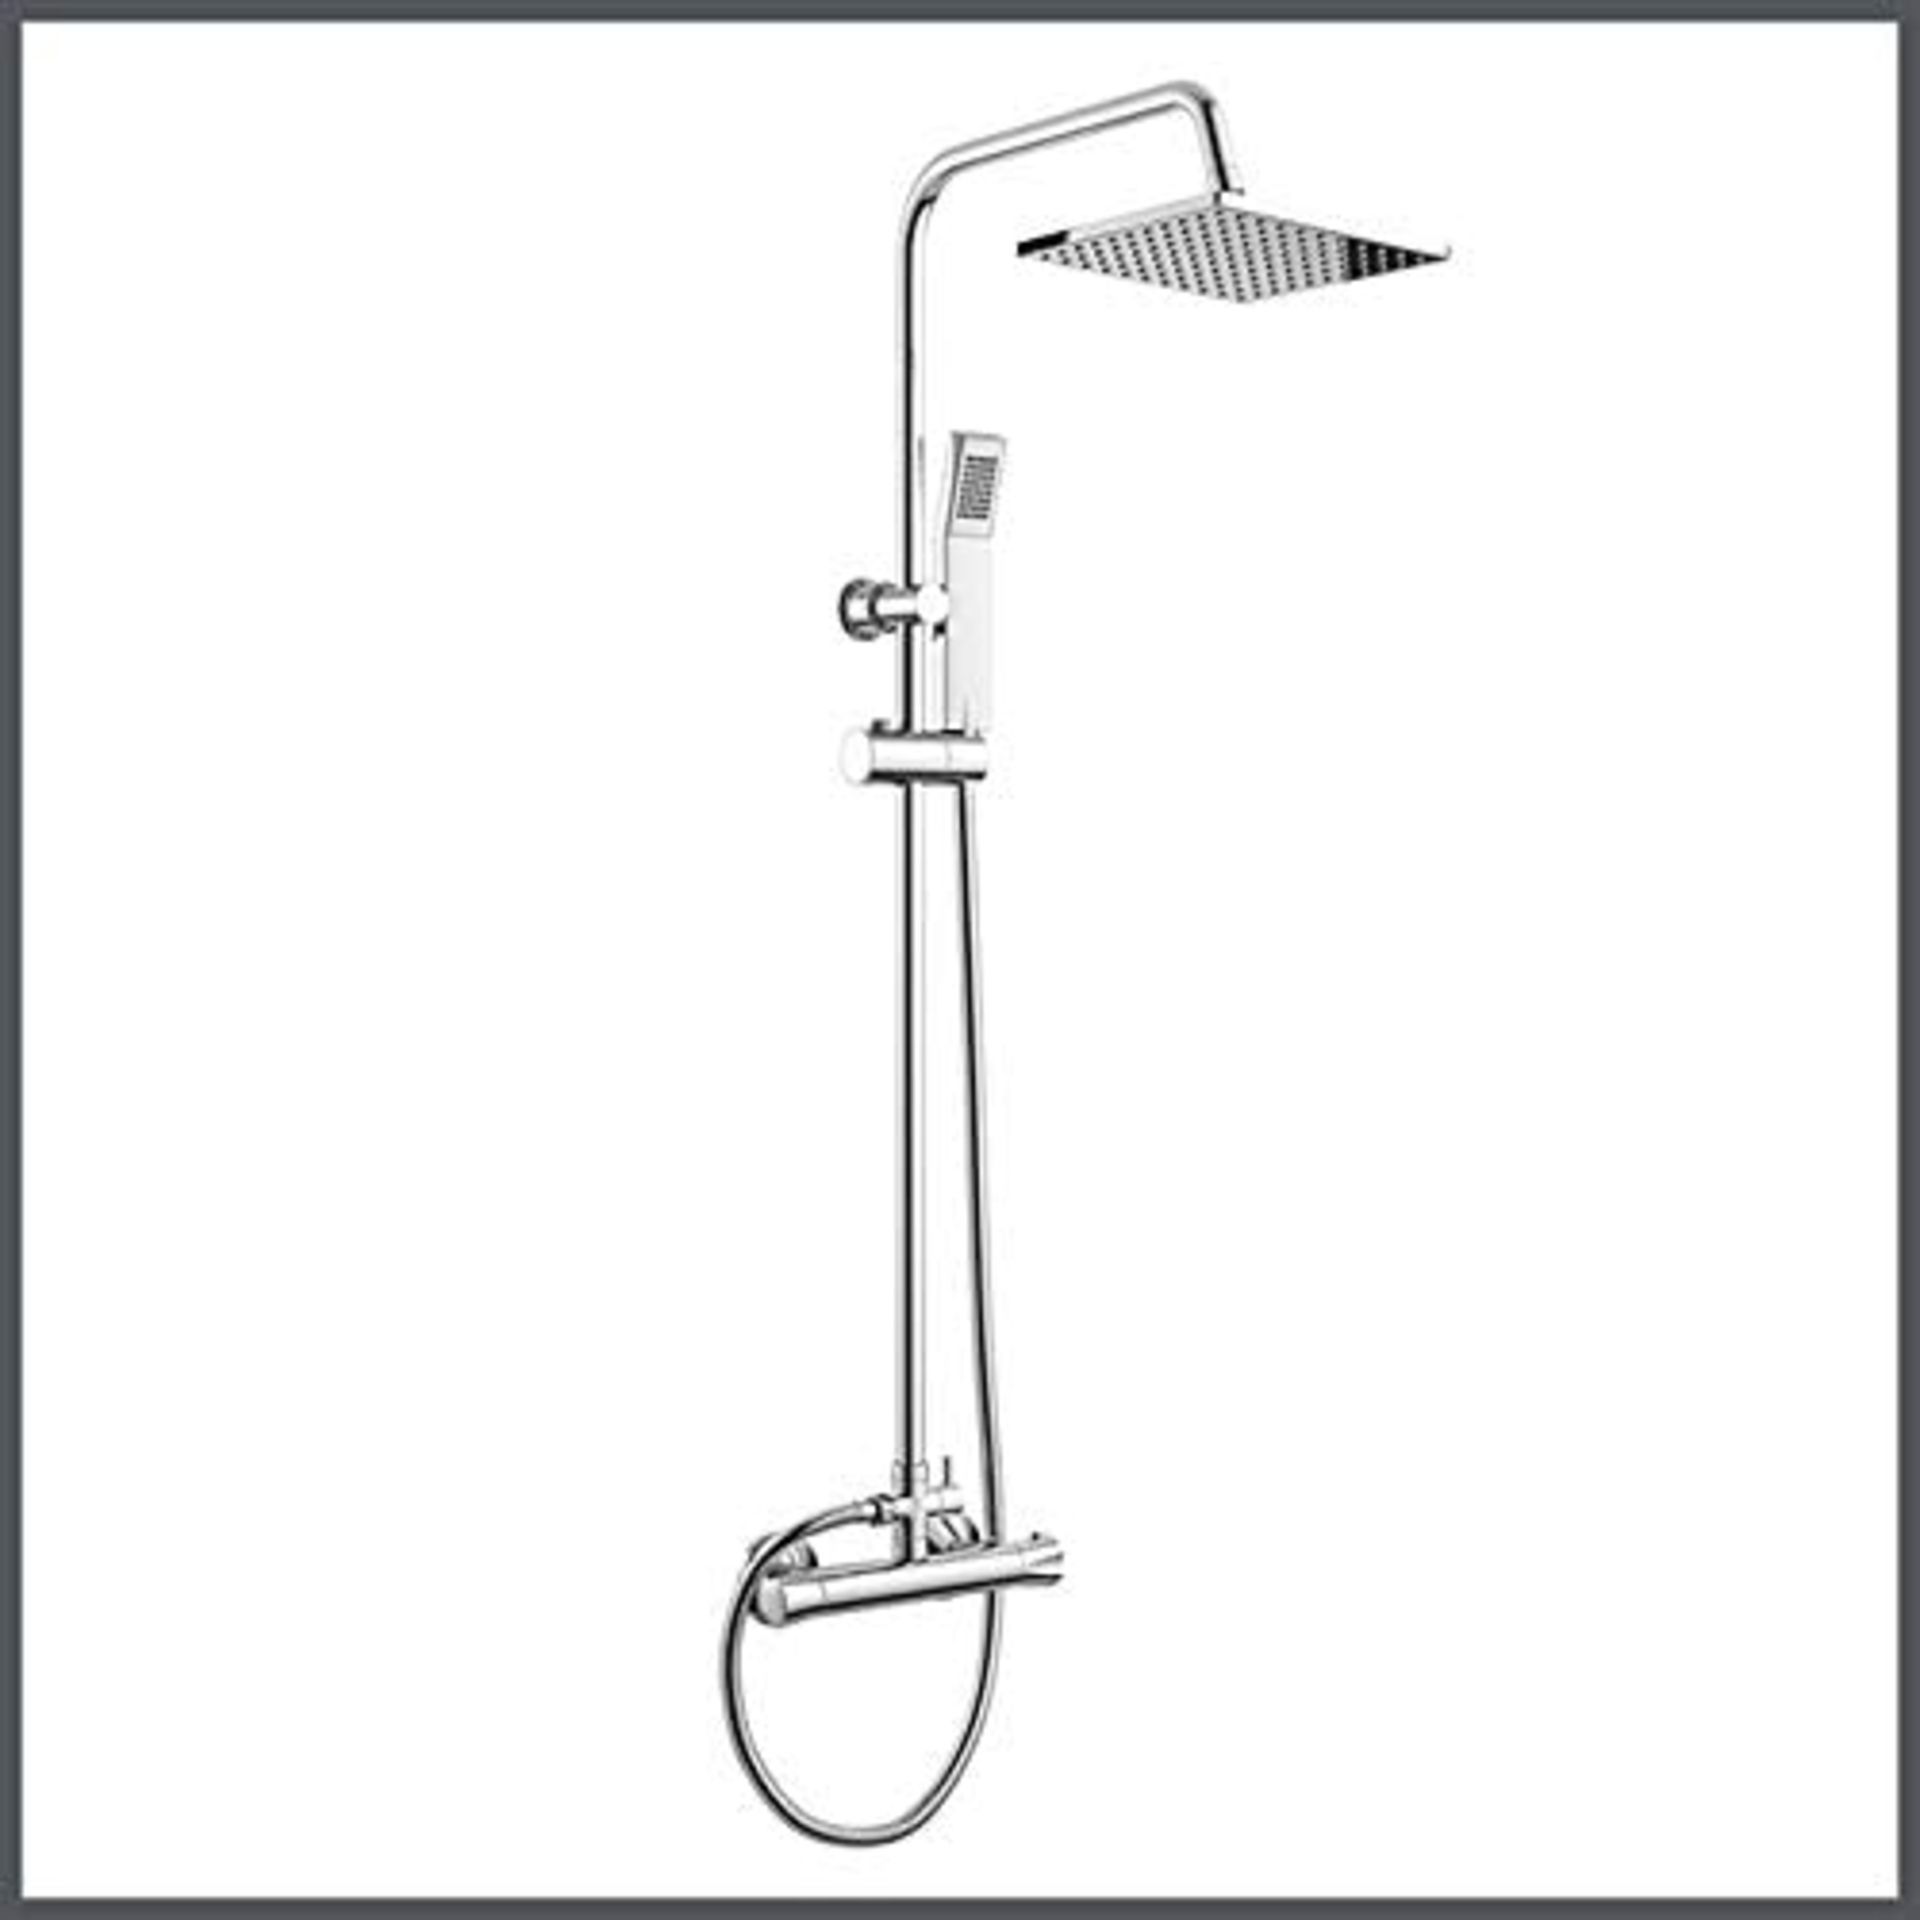 New & Boxed Exposed Thermostatic 2-Way Bar Mixer Shower Set Chrome Valve 200 mm Square Head + Ha - Image 2 of 2